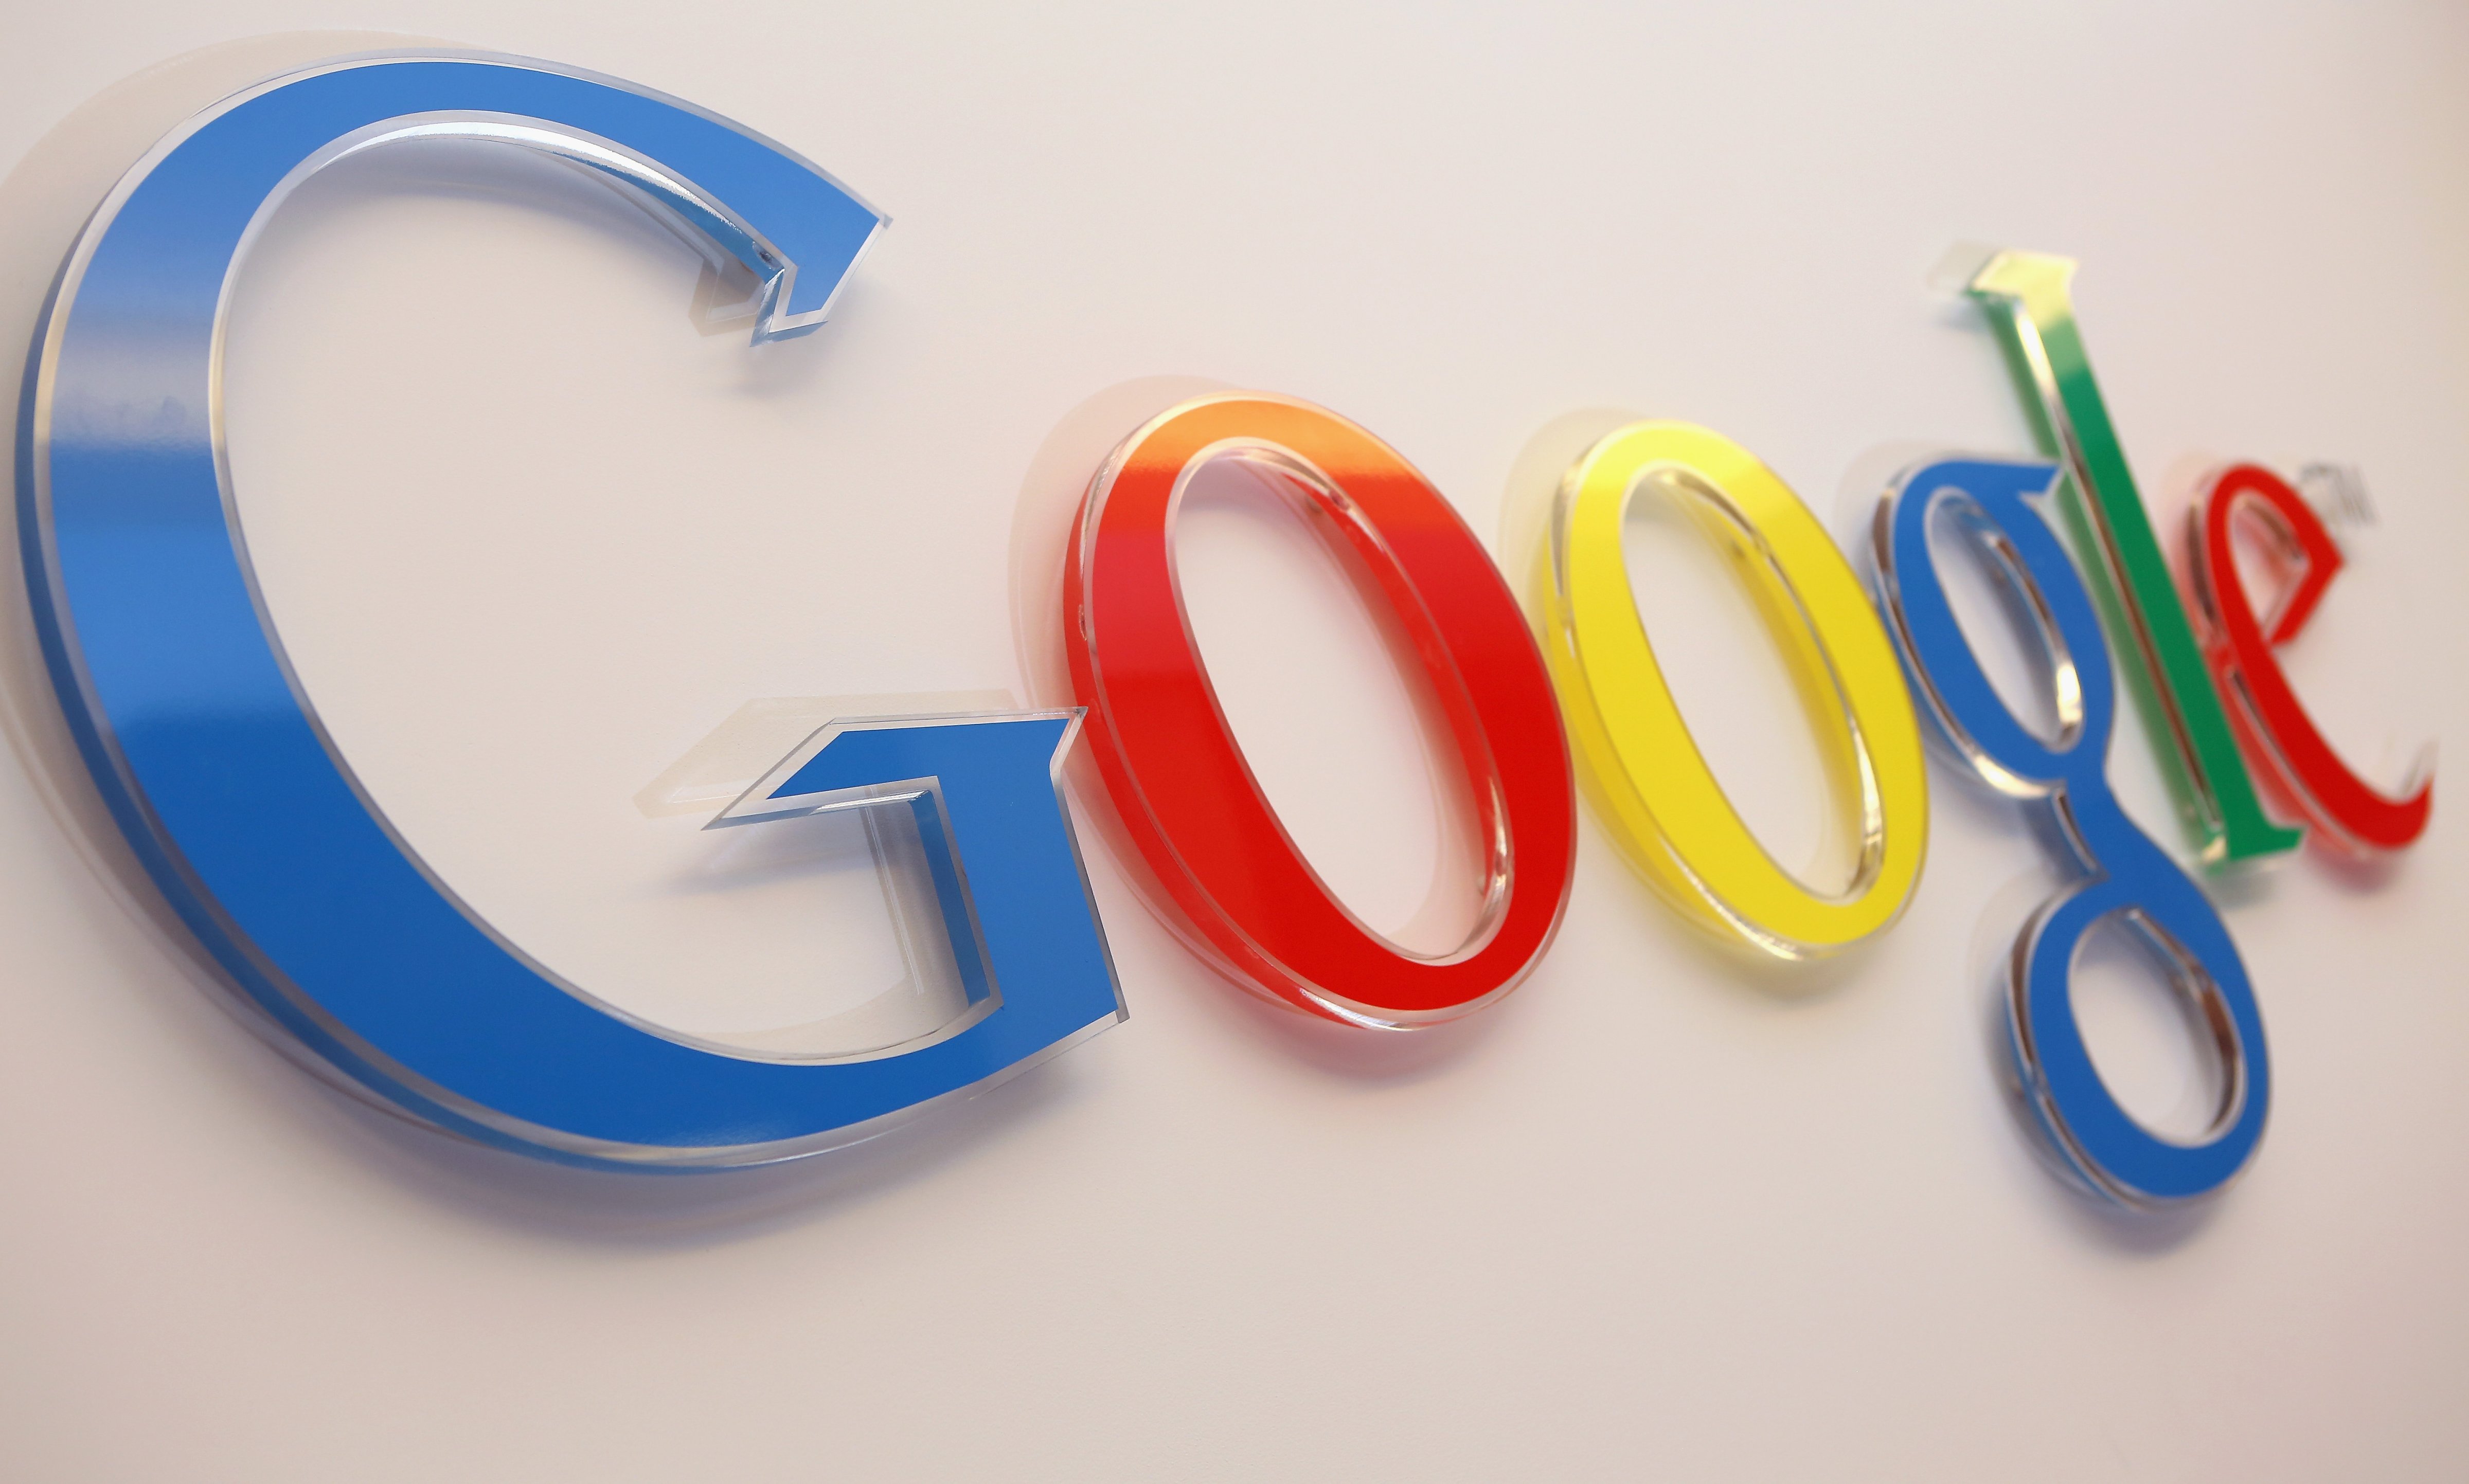 The Google logo is seen inside the company's offices on March 23, 2015 in Berlin, Germany. (Adam Berry&mdash;Getty Images)